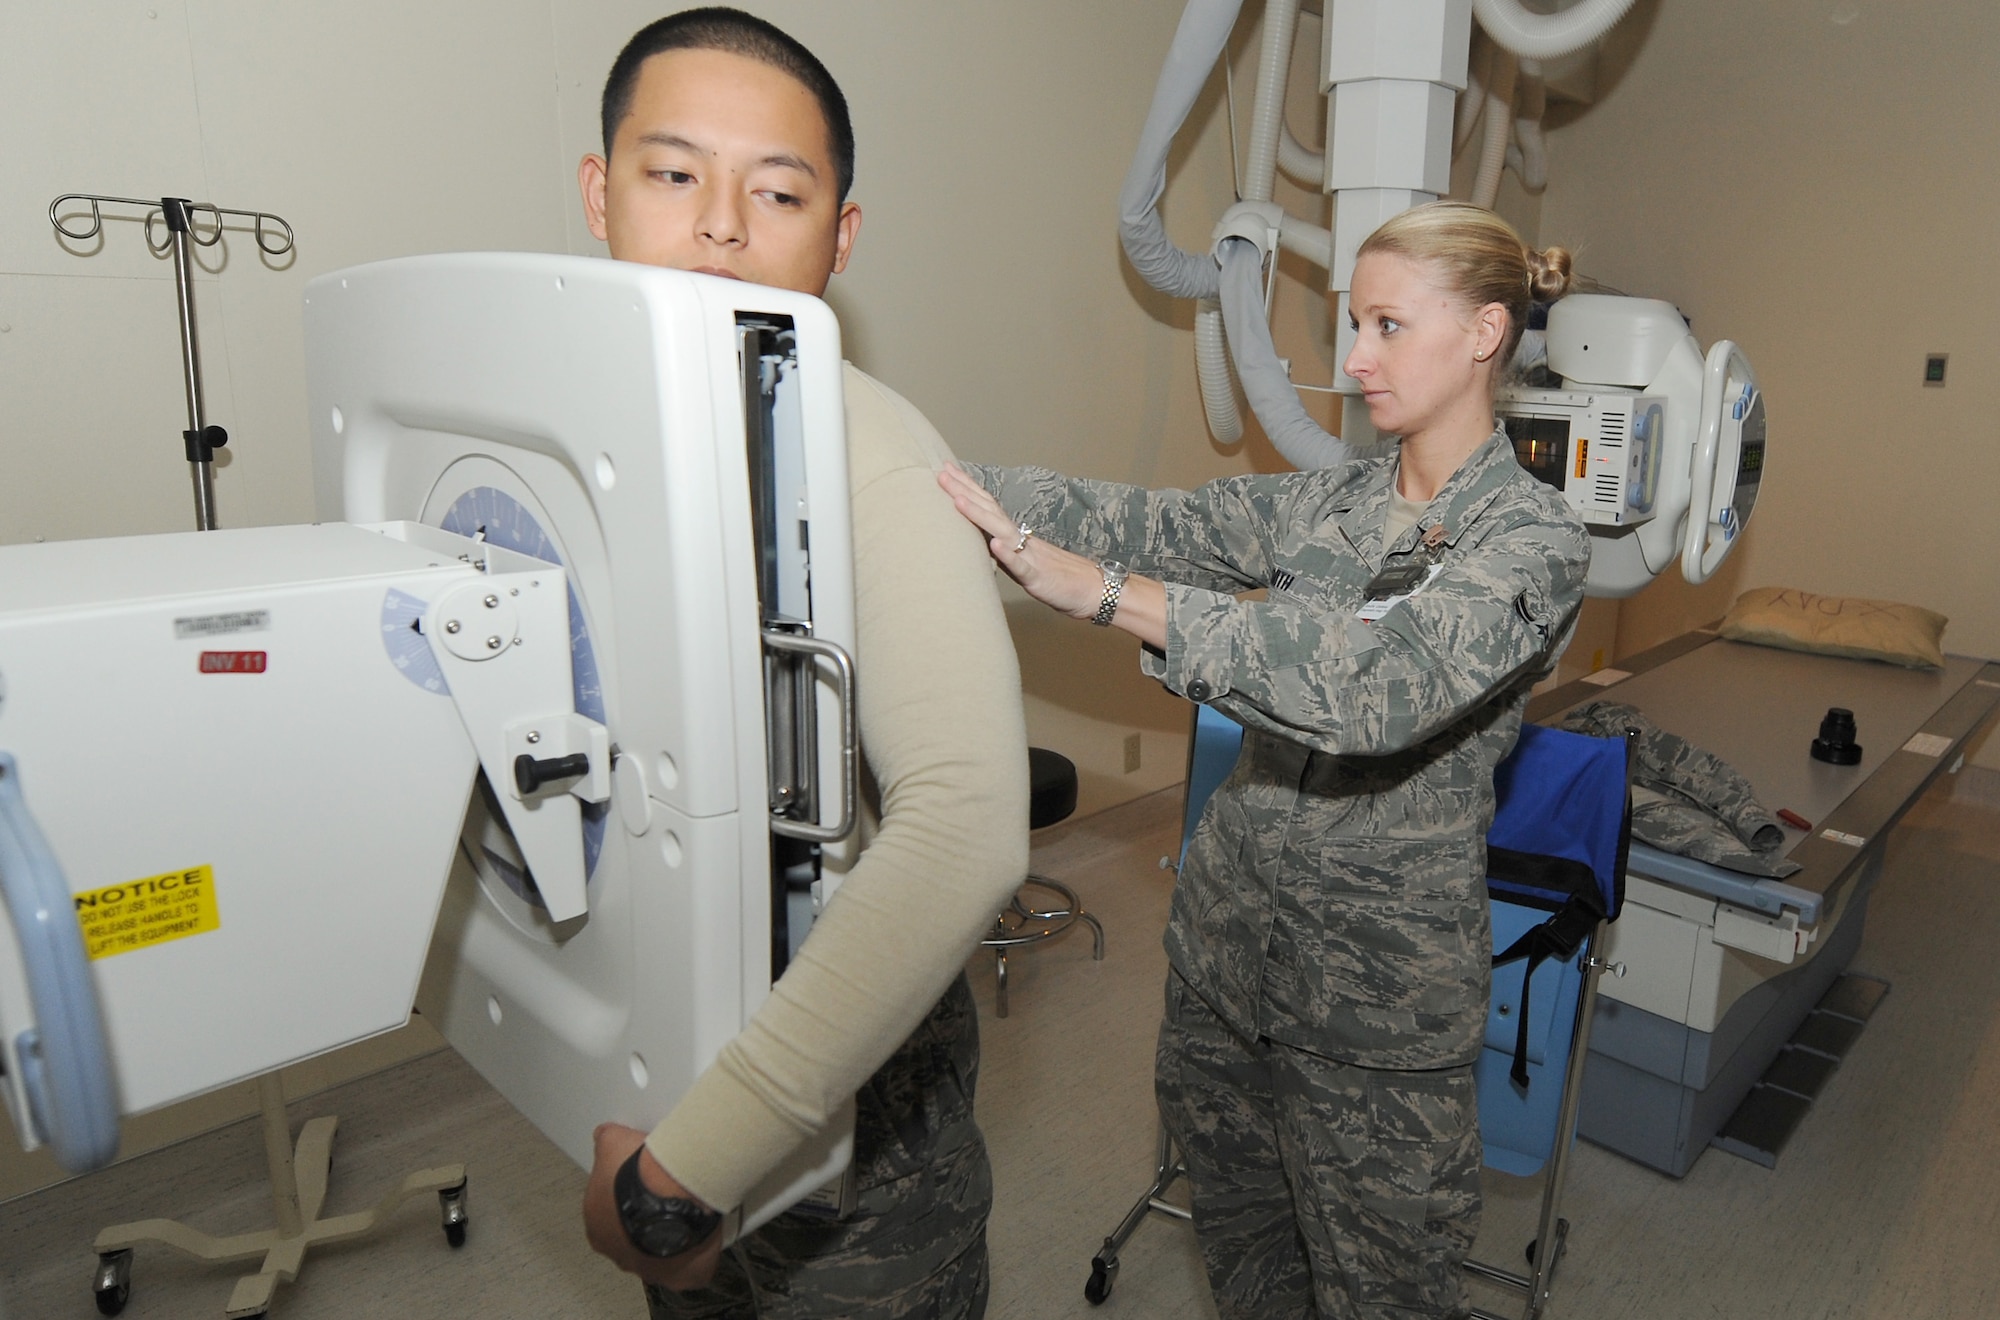 Airman 1st Class Celisse Smith, diagnostic imaging technologist, positions A1C Erick Alvarez for an x-ray exam Nov. 9 at the David Grant USAF Medical Center.  (U.S. Air Force photo/Staff Sgt. Liliana Moreno)